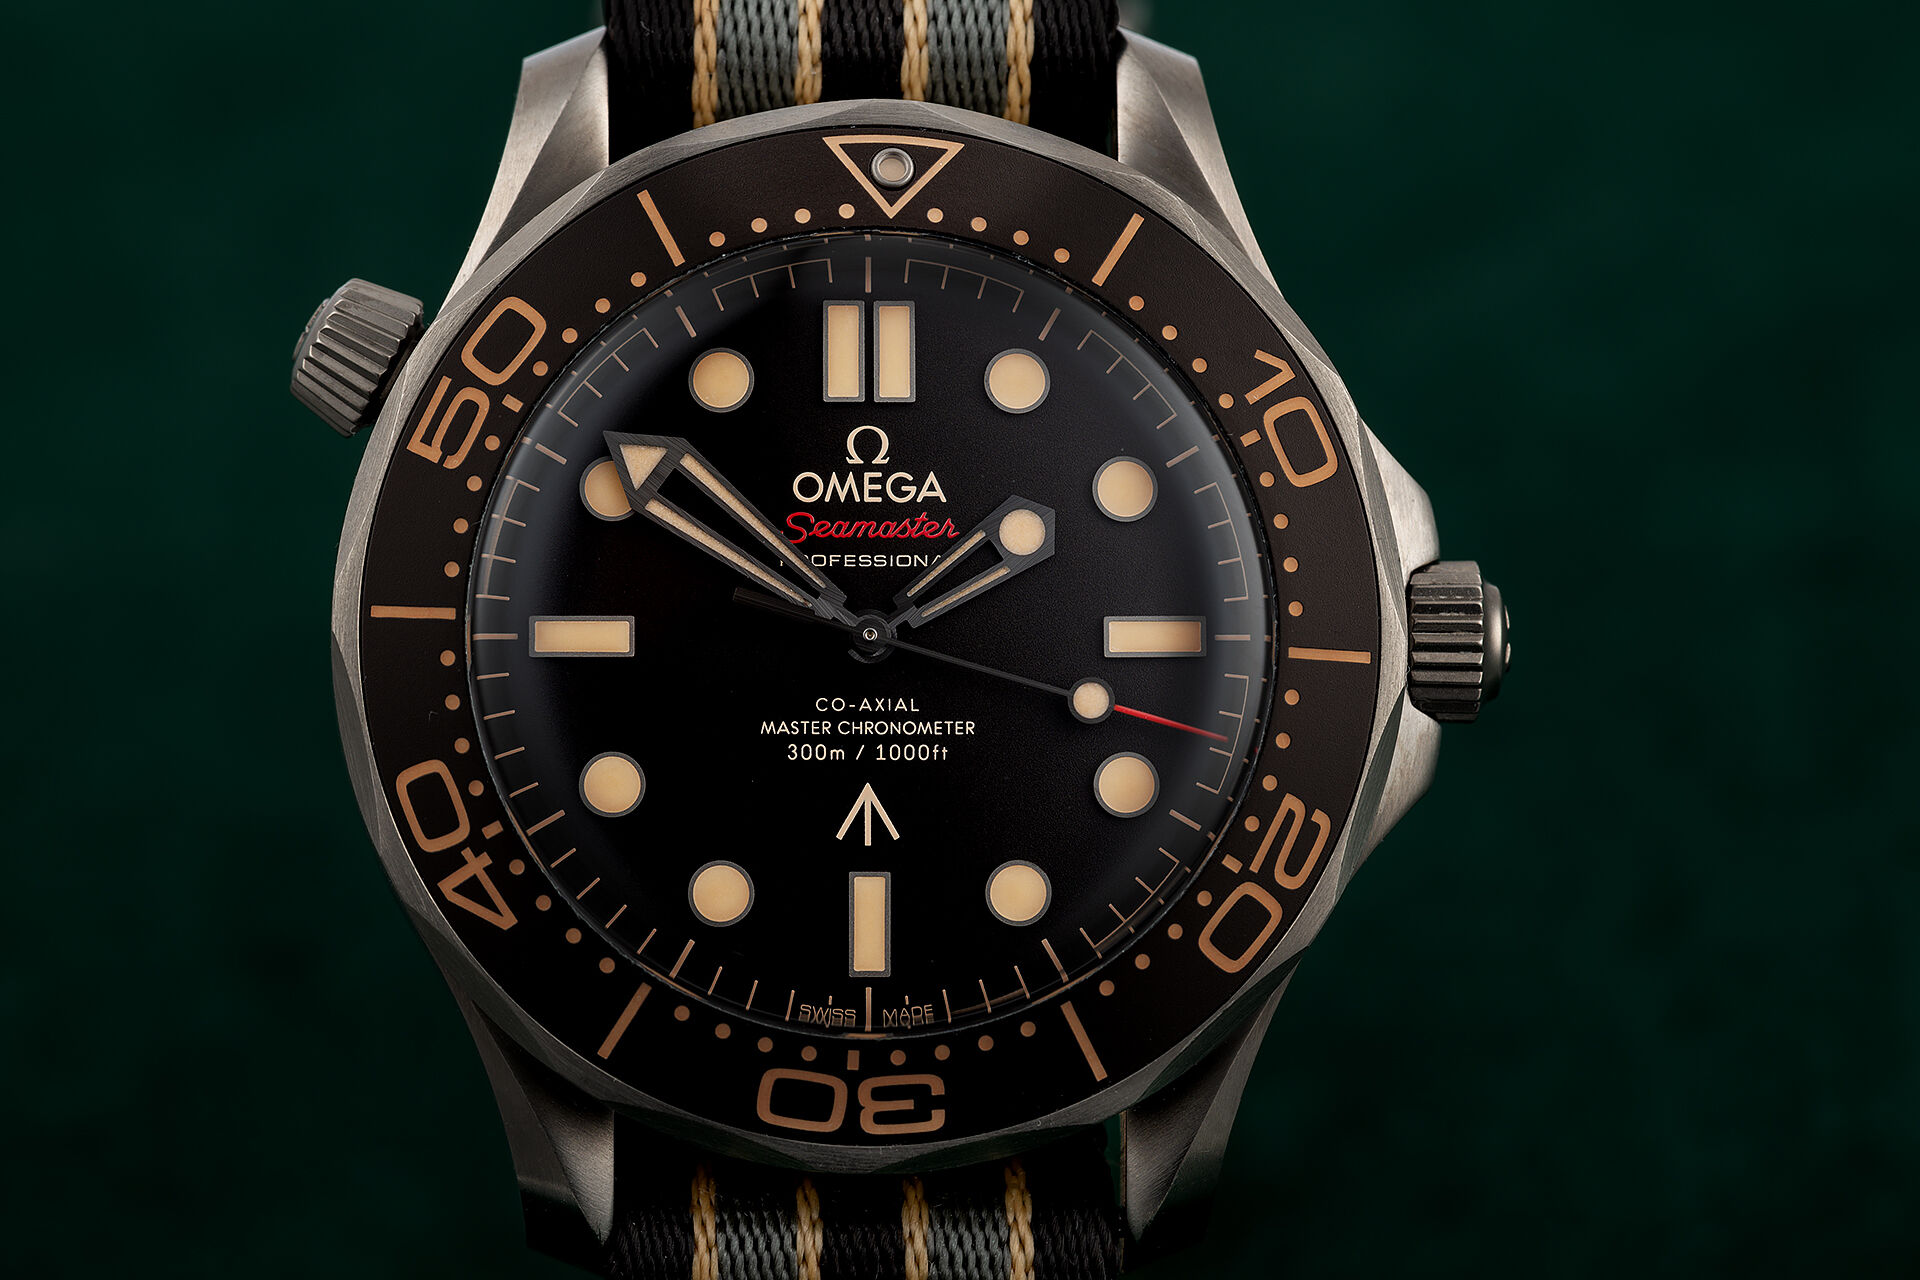 ref 210.92.42.20.01.001 | 'No Time To Die' | Omega Seamaster Diver 300